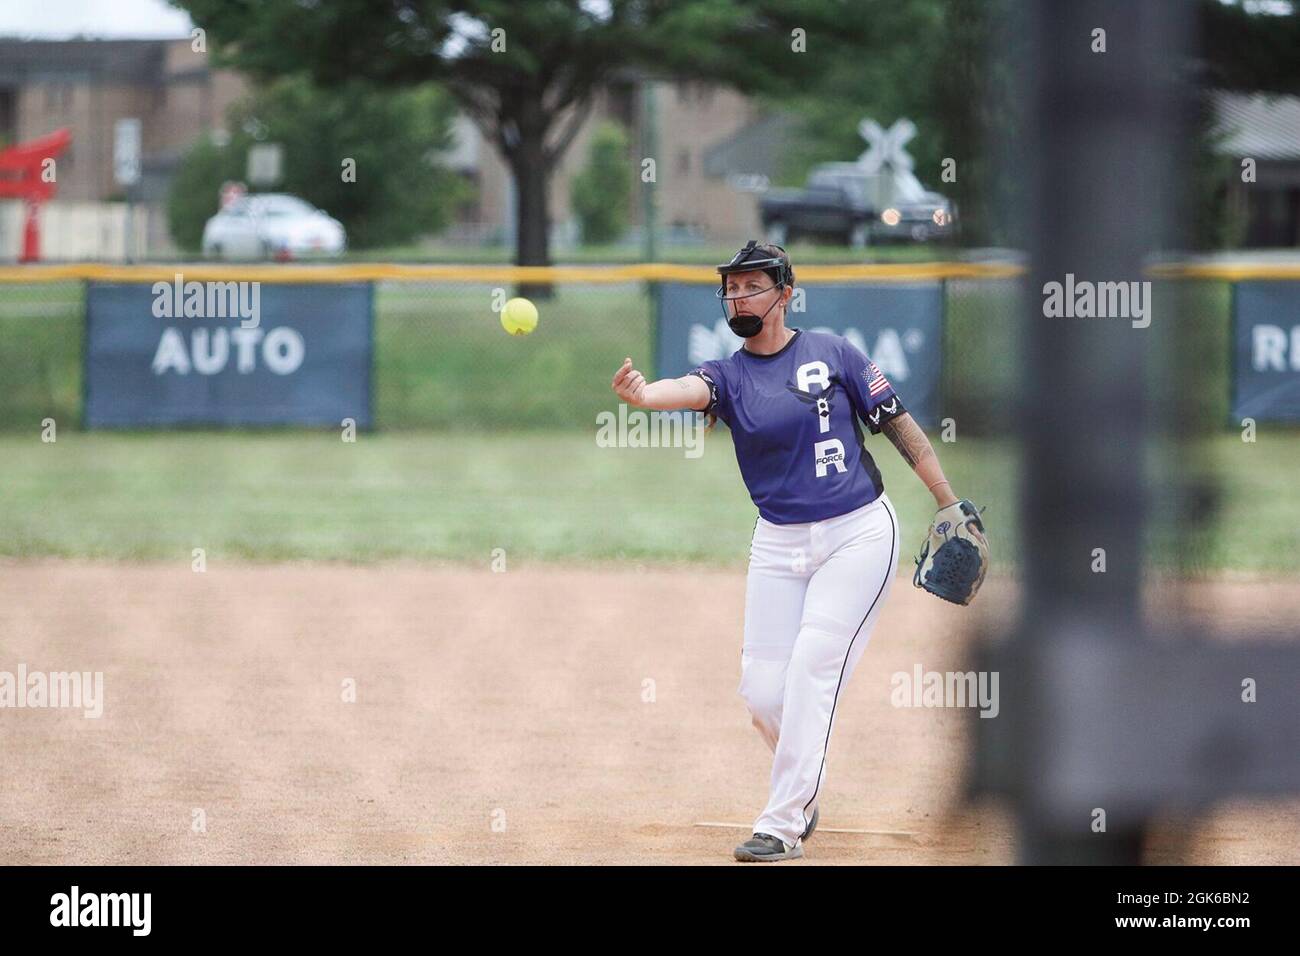 U.S. Air Force Staff Sgt. Megan Hines-Wade, Luke Air Force Base, Arizona, pitches during the 2021 Armed Forces Women's Softball Championship game Aug. 13 at Fort Campbell. Stock Photo